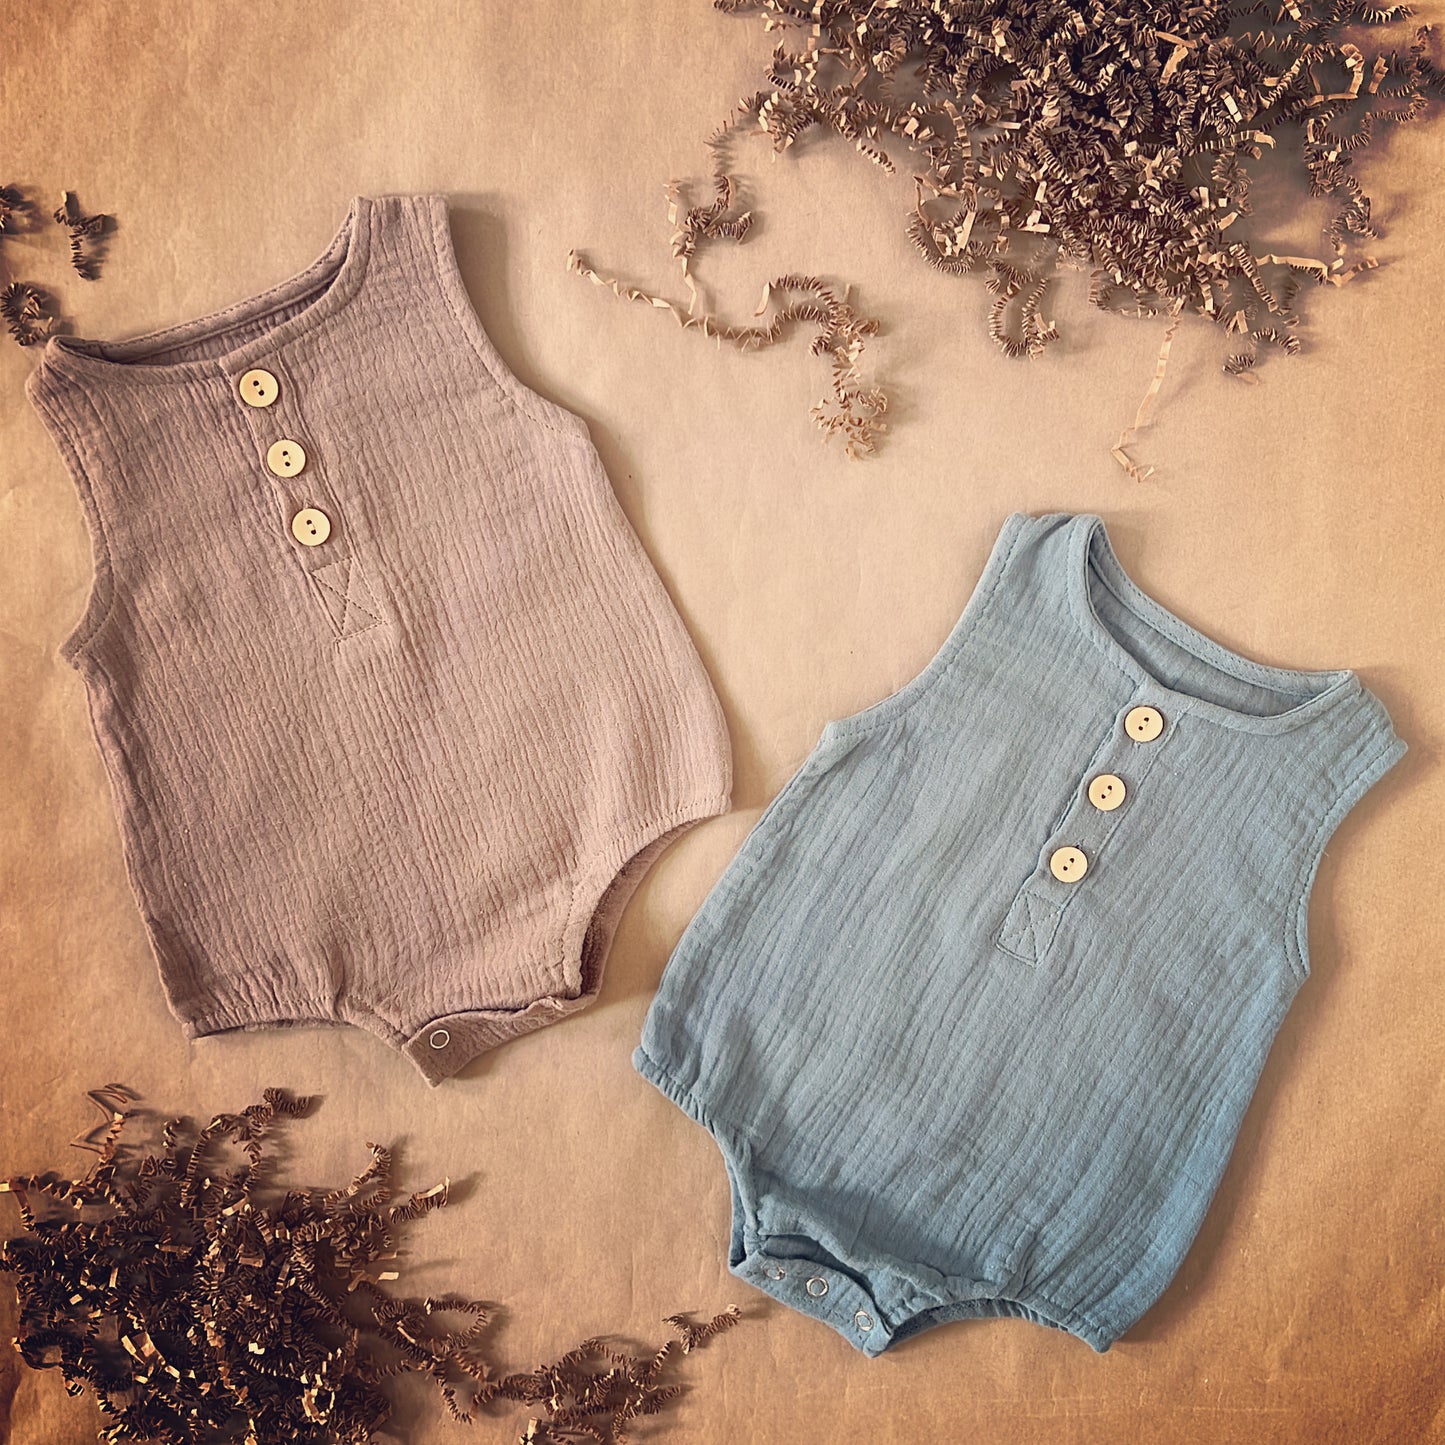 Sleeveless Baby Boy Summer Outfit